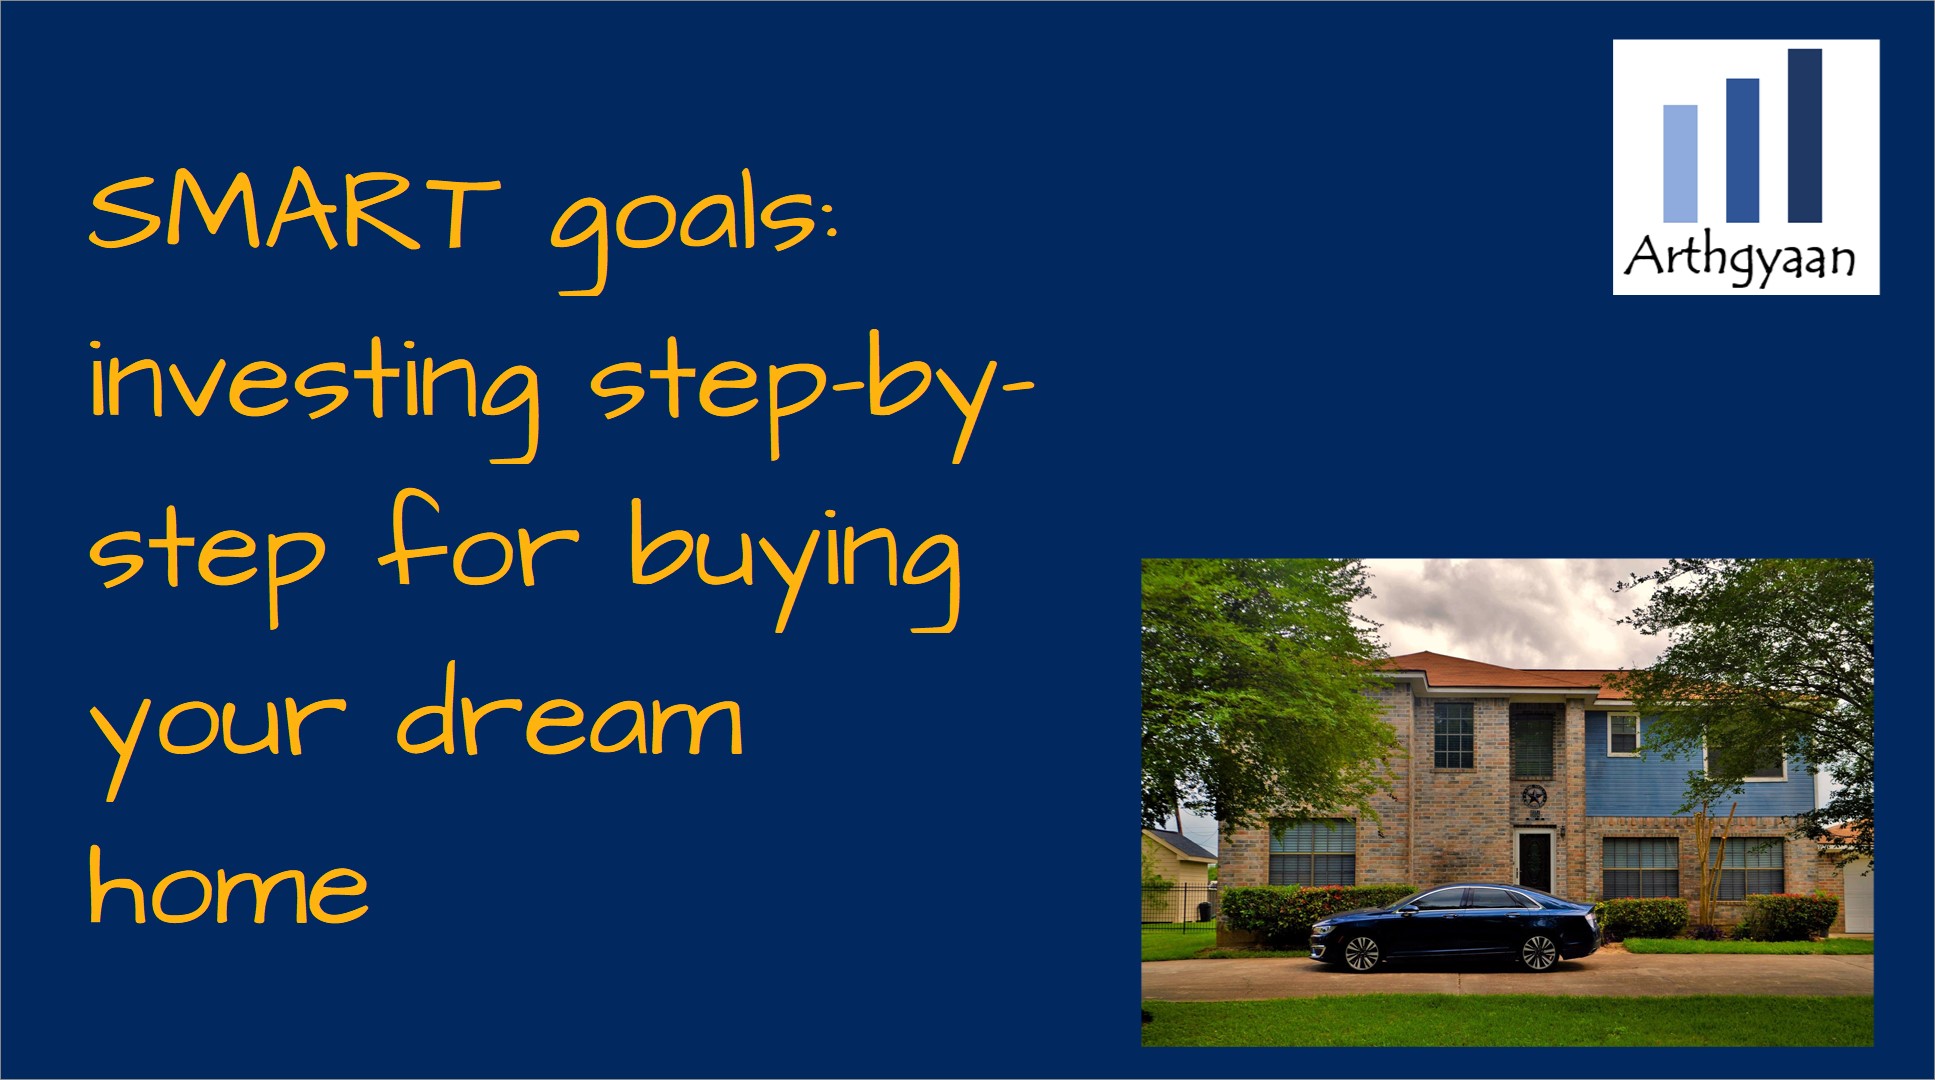 <p>This article offers the steps for identifying, quantifying and investing for buying your dream house.</p>

